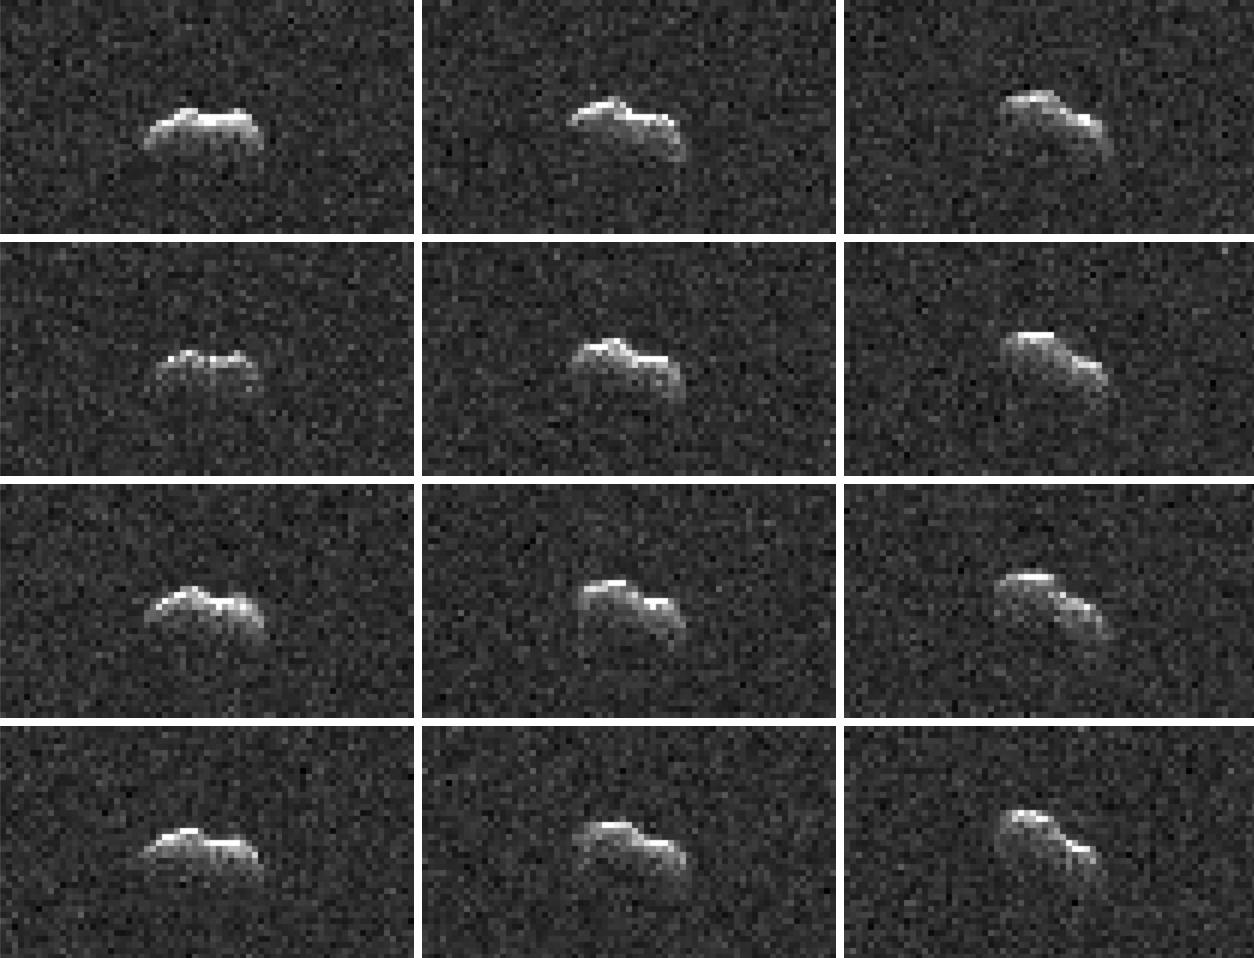 PIA24561: Goldstone Radar Observations of Asteroid 2001 FO32